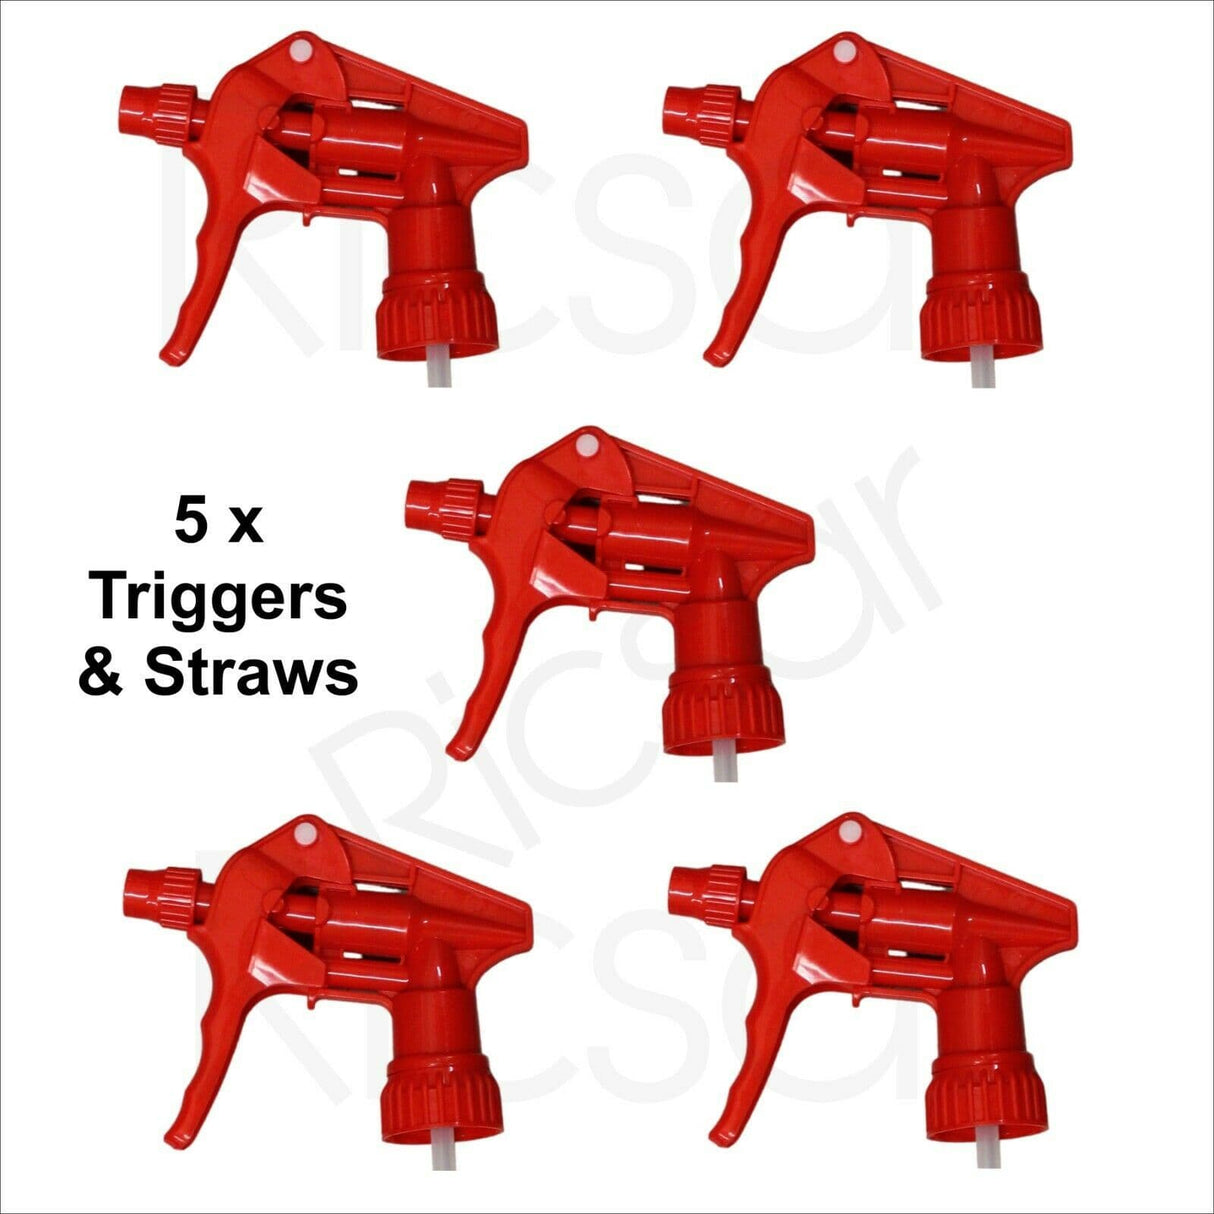 5 x RED Dart Trigger Spray Heads With Straws - Valeting, cleaning